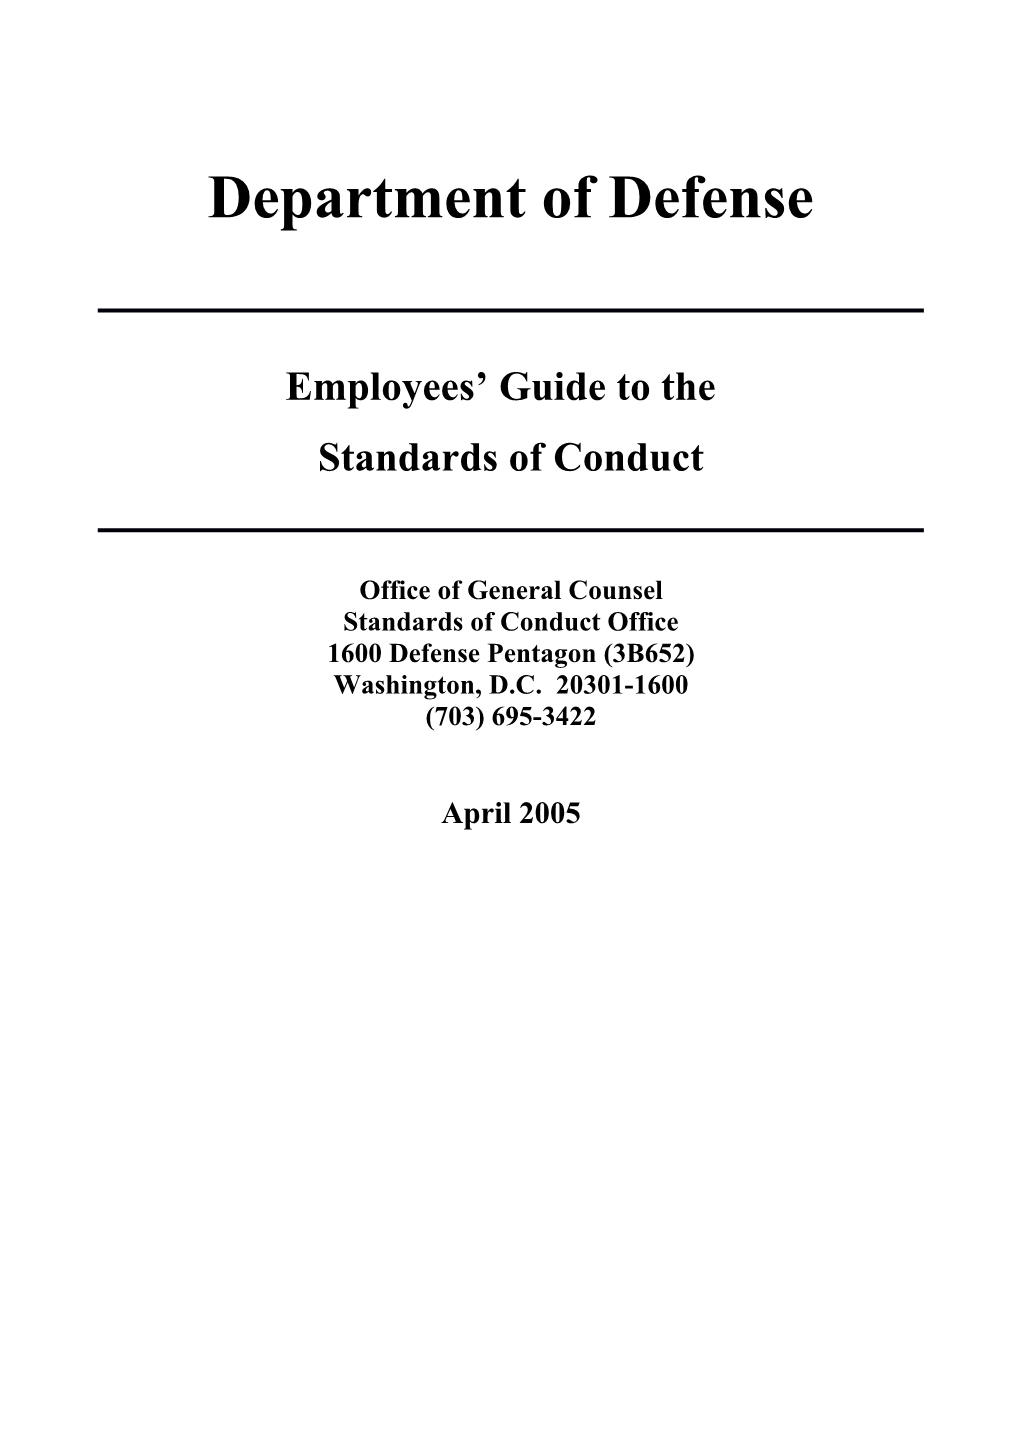 Employees Guide to The